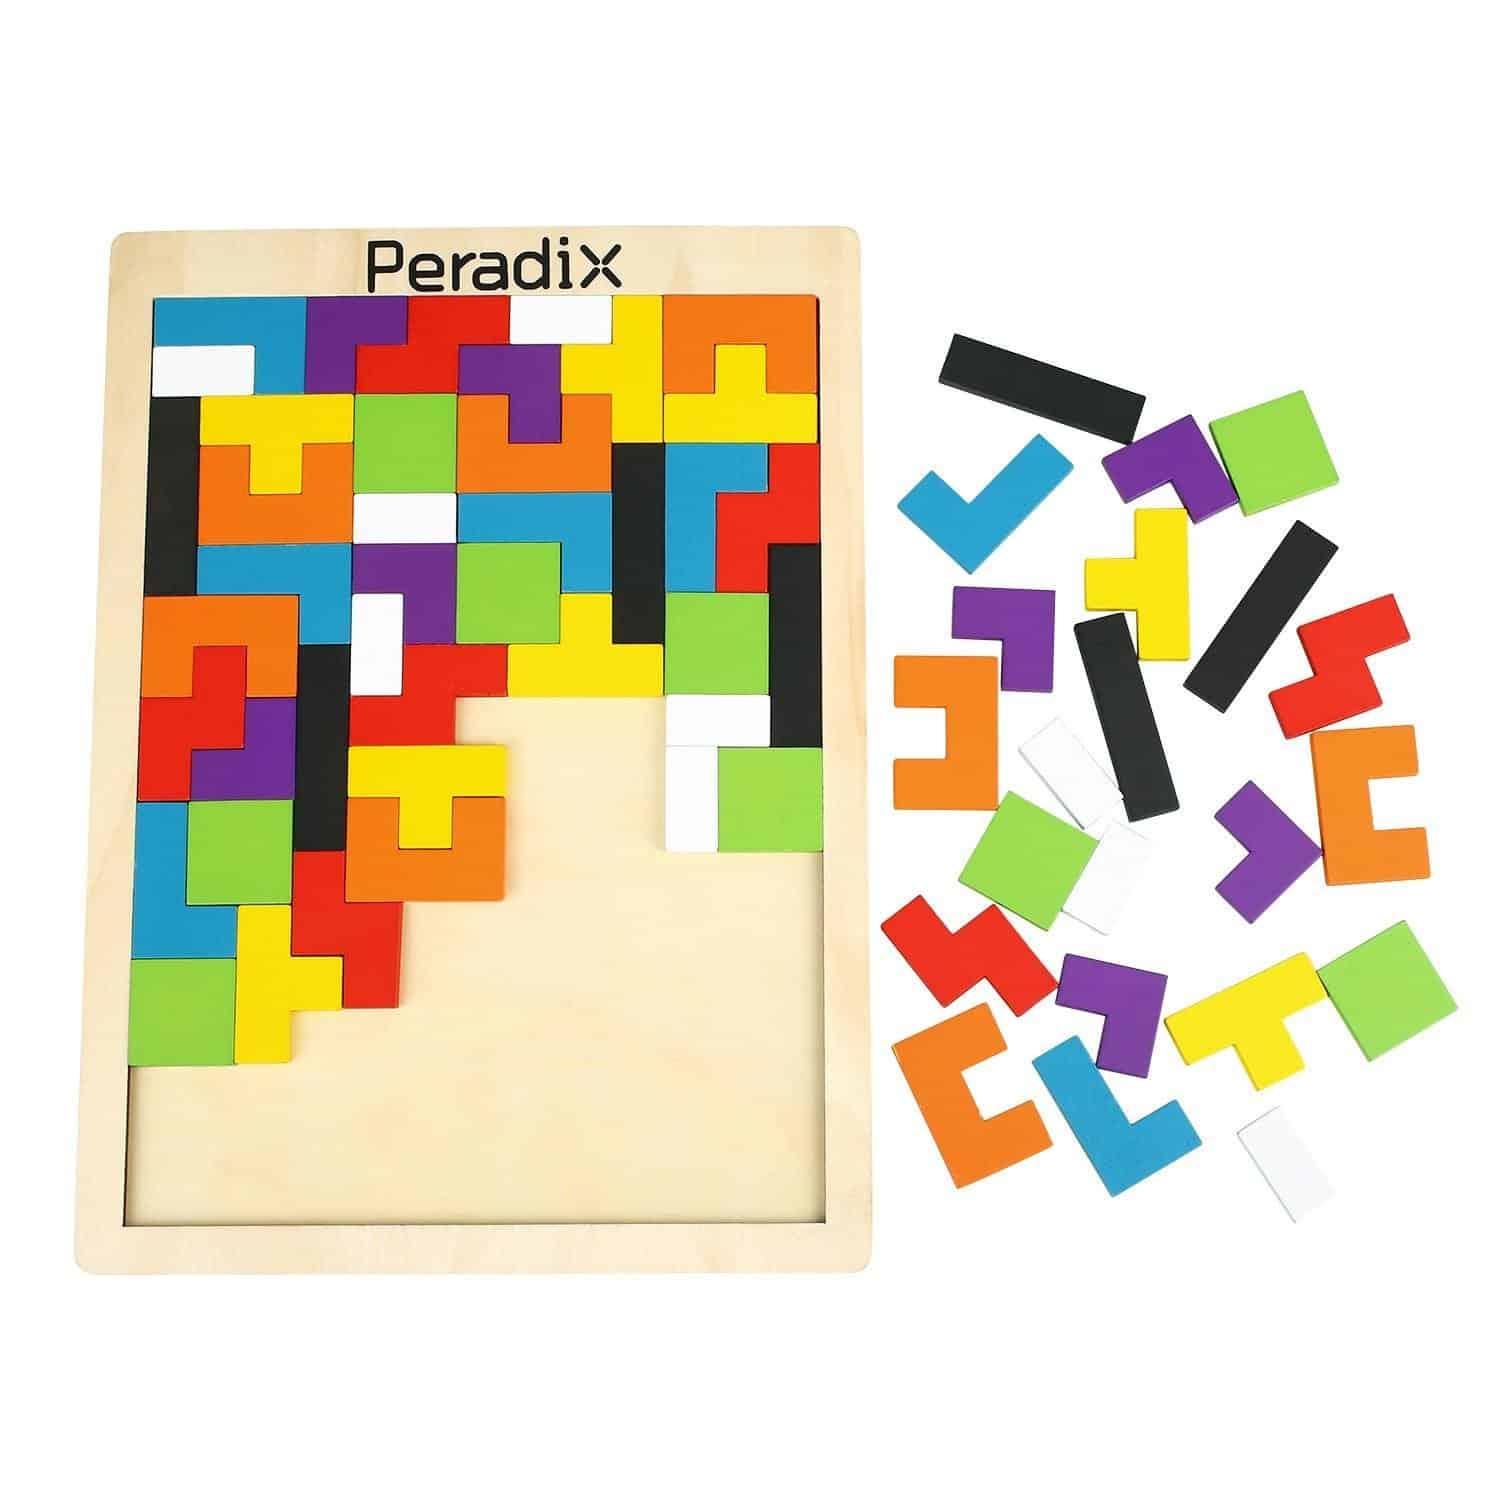 EXCLUSIVE HIP MOM DEAL – Wooden Jigsaw Tangram Puzzle 55% off!